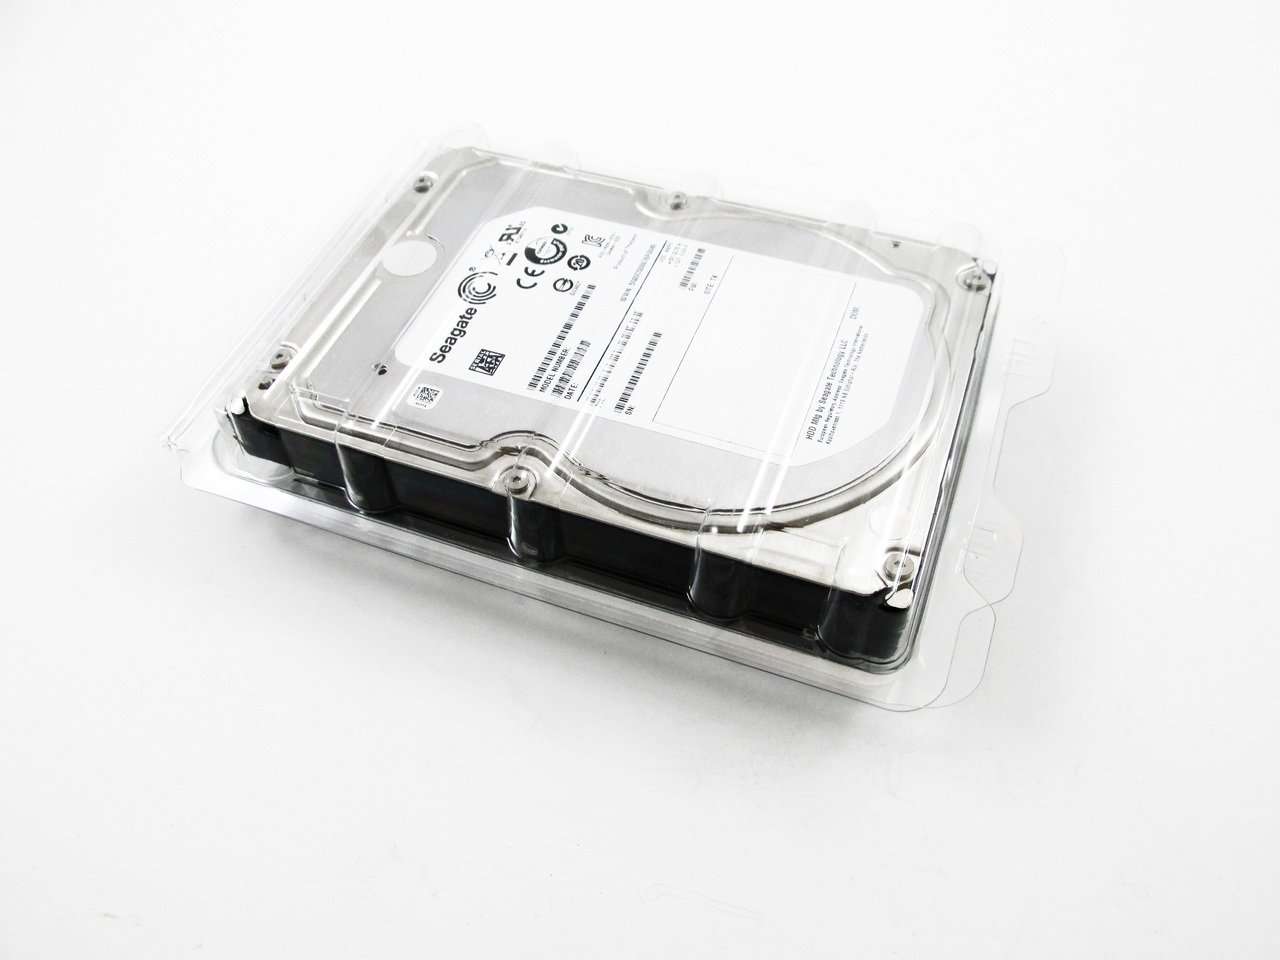 Seagate Constellation ST32000644NS 2TB 7.2K RPM SATA 64MB 3.5" Manufacturer Recertified HDD